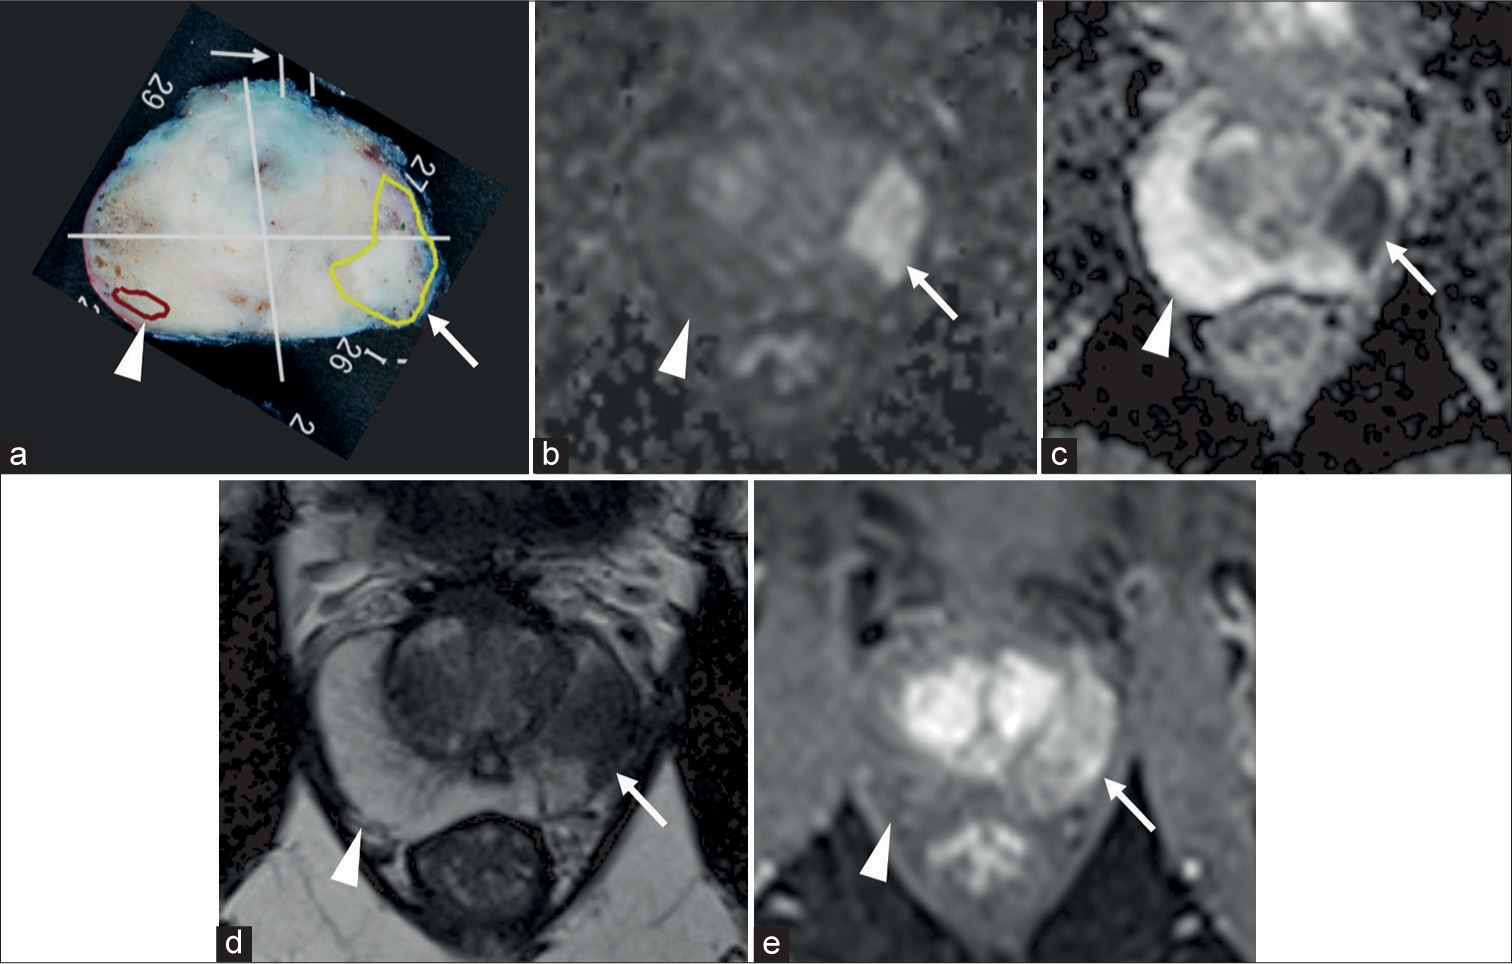 (a) Pathological map of PC, (b-e) mpMRI; (b) DWI, (c) ADC map, (d) T2WI, and (e) DCE. (a) Two lesions, one yellow and one brown, were detected on the pathological map of PC. The yellow lesion (white arrow) in the left peripheral zone showed hyperintensity on DWI, hypointensity on ADCmap, hypointensity on T2WI, and early enhancement on DCE. The yellow lesion (white arrow) was assessed as PI-RADS category 5 and classified as MRI-detectable PC. In contrast, the brown lesion (white arrow head) in the right peripheral zone showed no abnormal signal on mpMRI. The brown lesion (white arrow head) was assessed PIRADS categories 1 and classified as MRI-undetectable PC. (ADC: Apparent diffusion coefficient, DCE: Dynamic contrast-enhanced, MRI: Magnetic resonance imaging, DWI: Diffusion-weighted imaging, mpMRI: multiparametric magnetic resonance imaging, PC: Prostate cancer, T2WI: T2-weighted imaging, PI-RADS: Prostate imaging reporting and data system.)